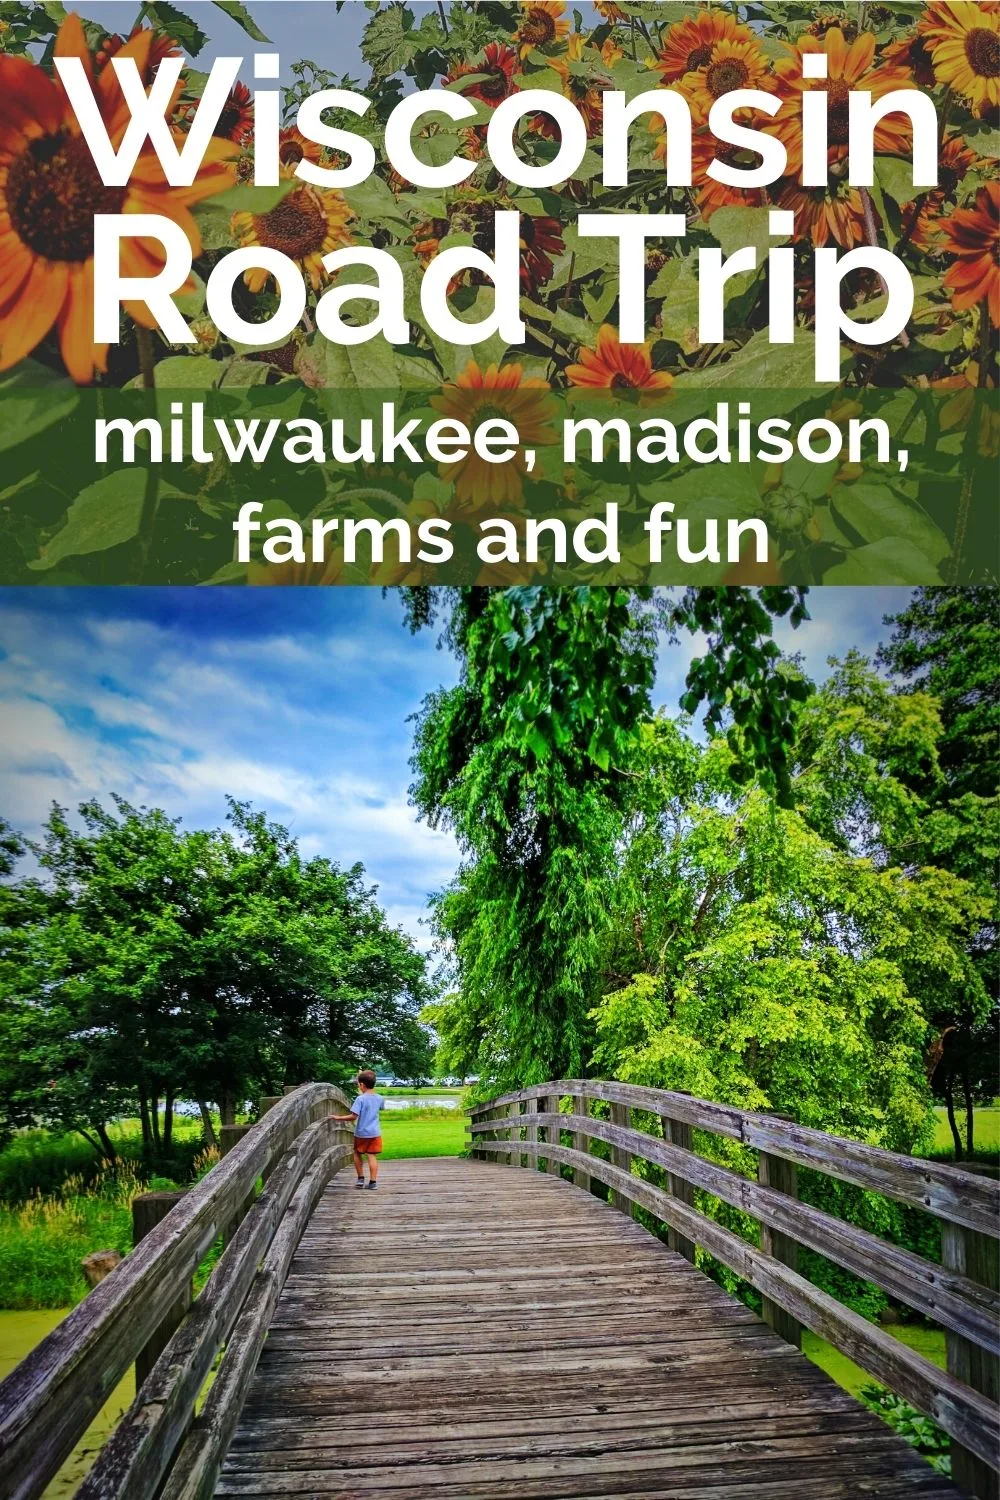 This Wisconsin road trip explores the best of farm country, historic towns, awesome natural wonders, Milwaukee and Madison. See the best of Southern Wisconsin on this easy 7 day itinerary of beautiful sights and fun.